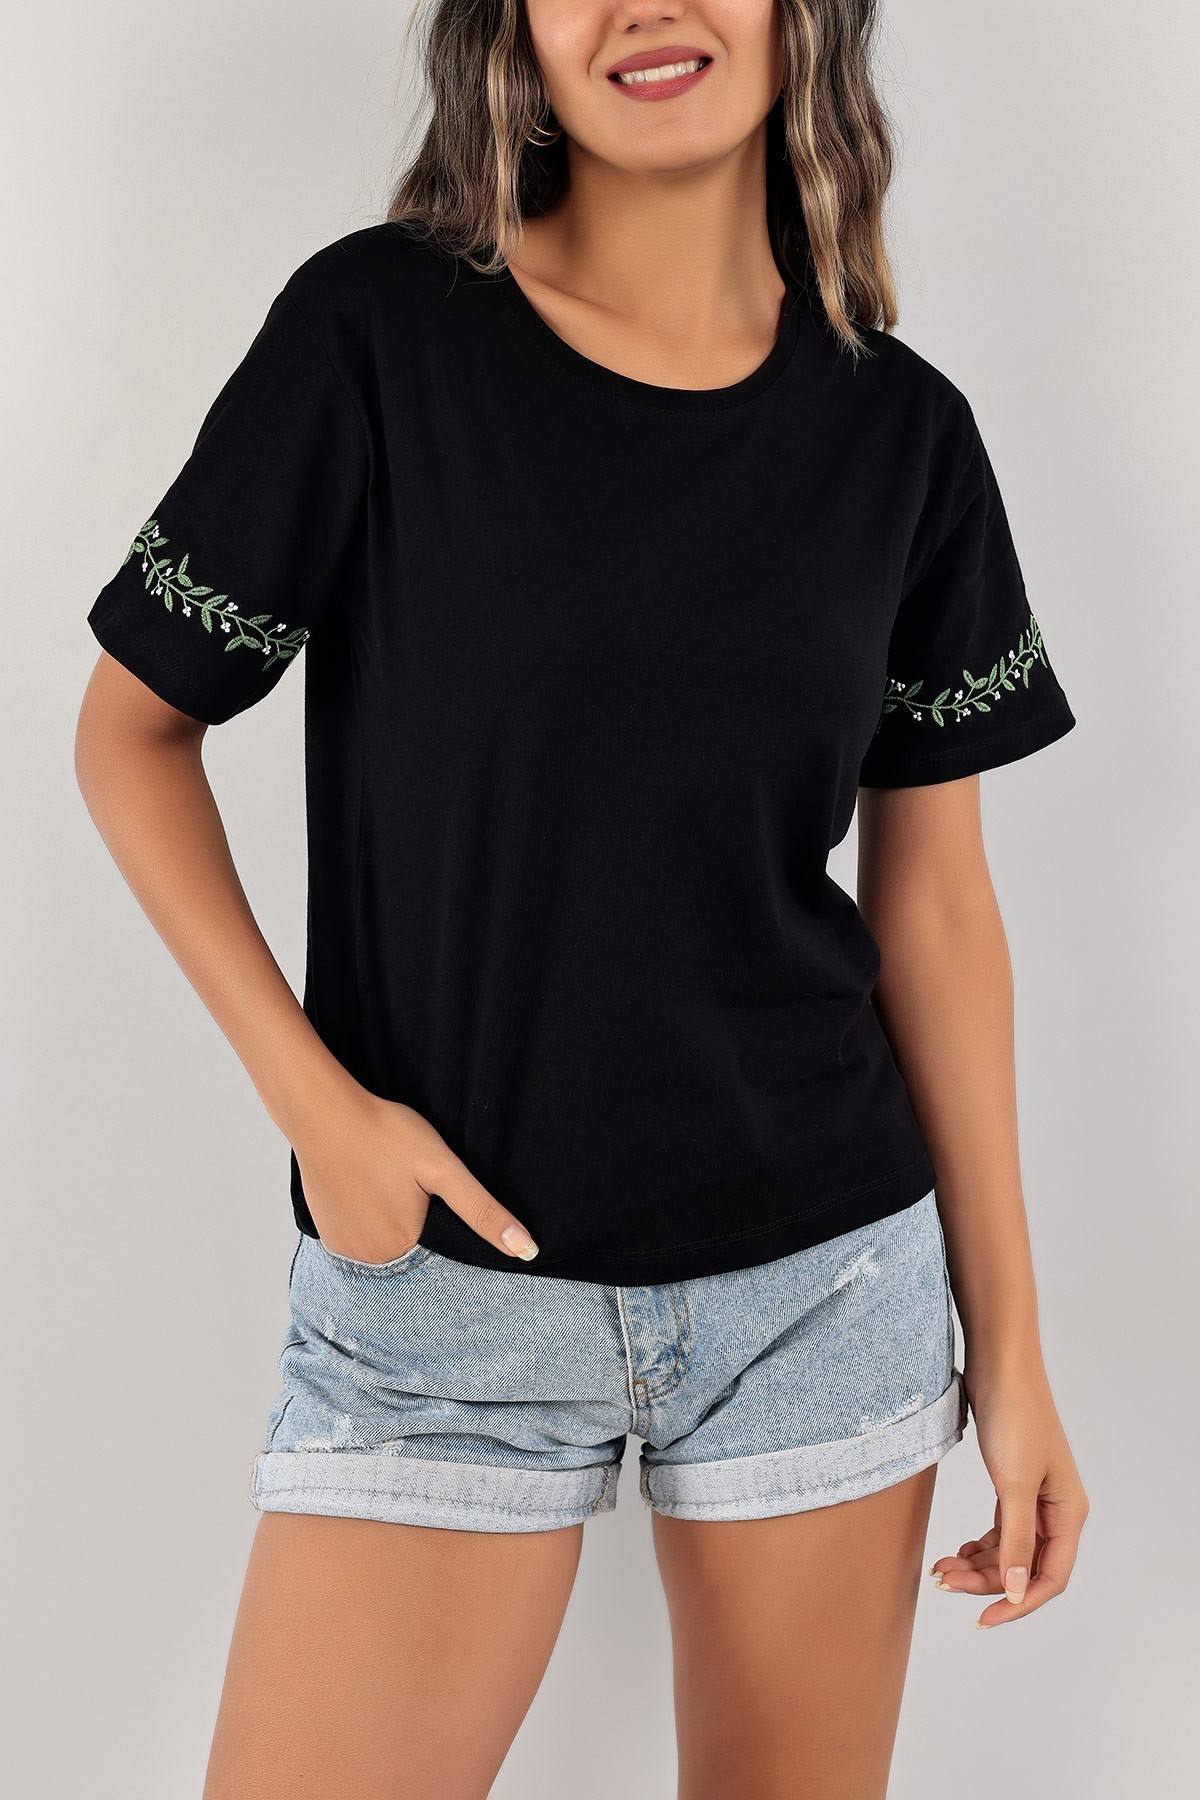 Women's black embroidered T-shirt